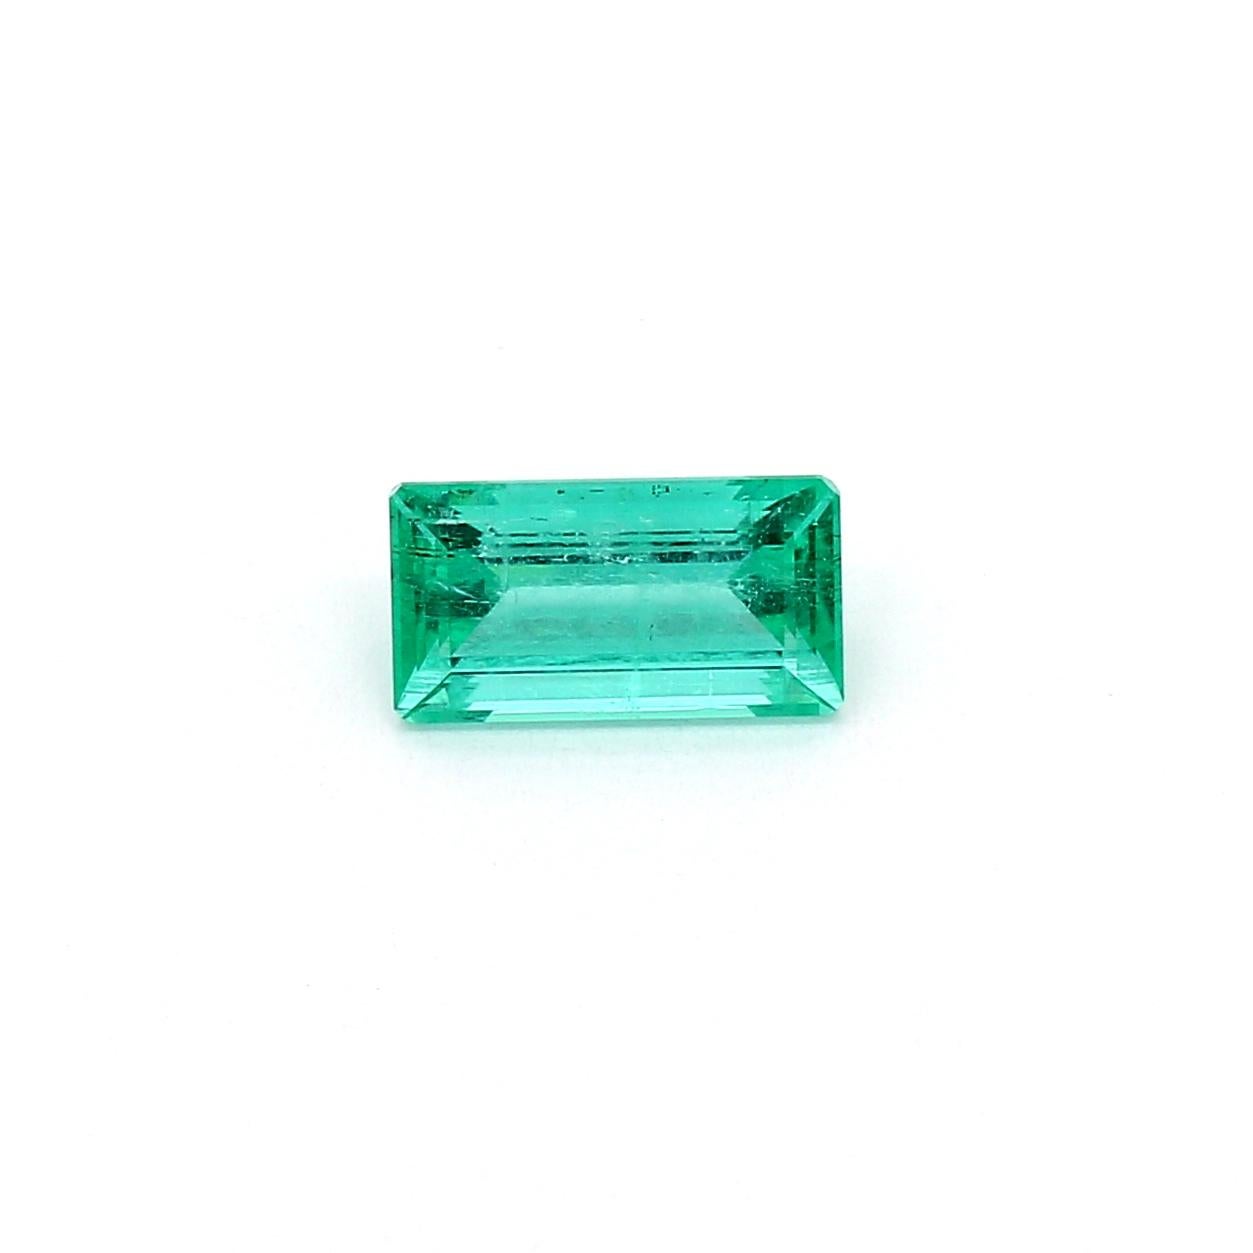 An amazing Russian Emerald which allows jewelers to create a unique piece of wearable art.
This exceptional quality gemstone would make a custom-made jewelry design. Perfect for a Ring or Pendant.

Shape - Baguette
Weight - 0.82 ct
Treatment - Minor